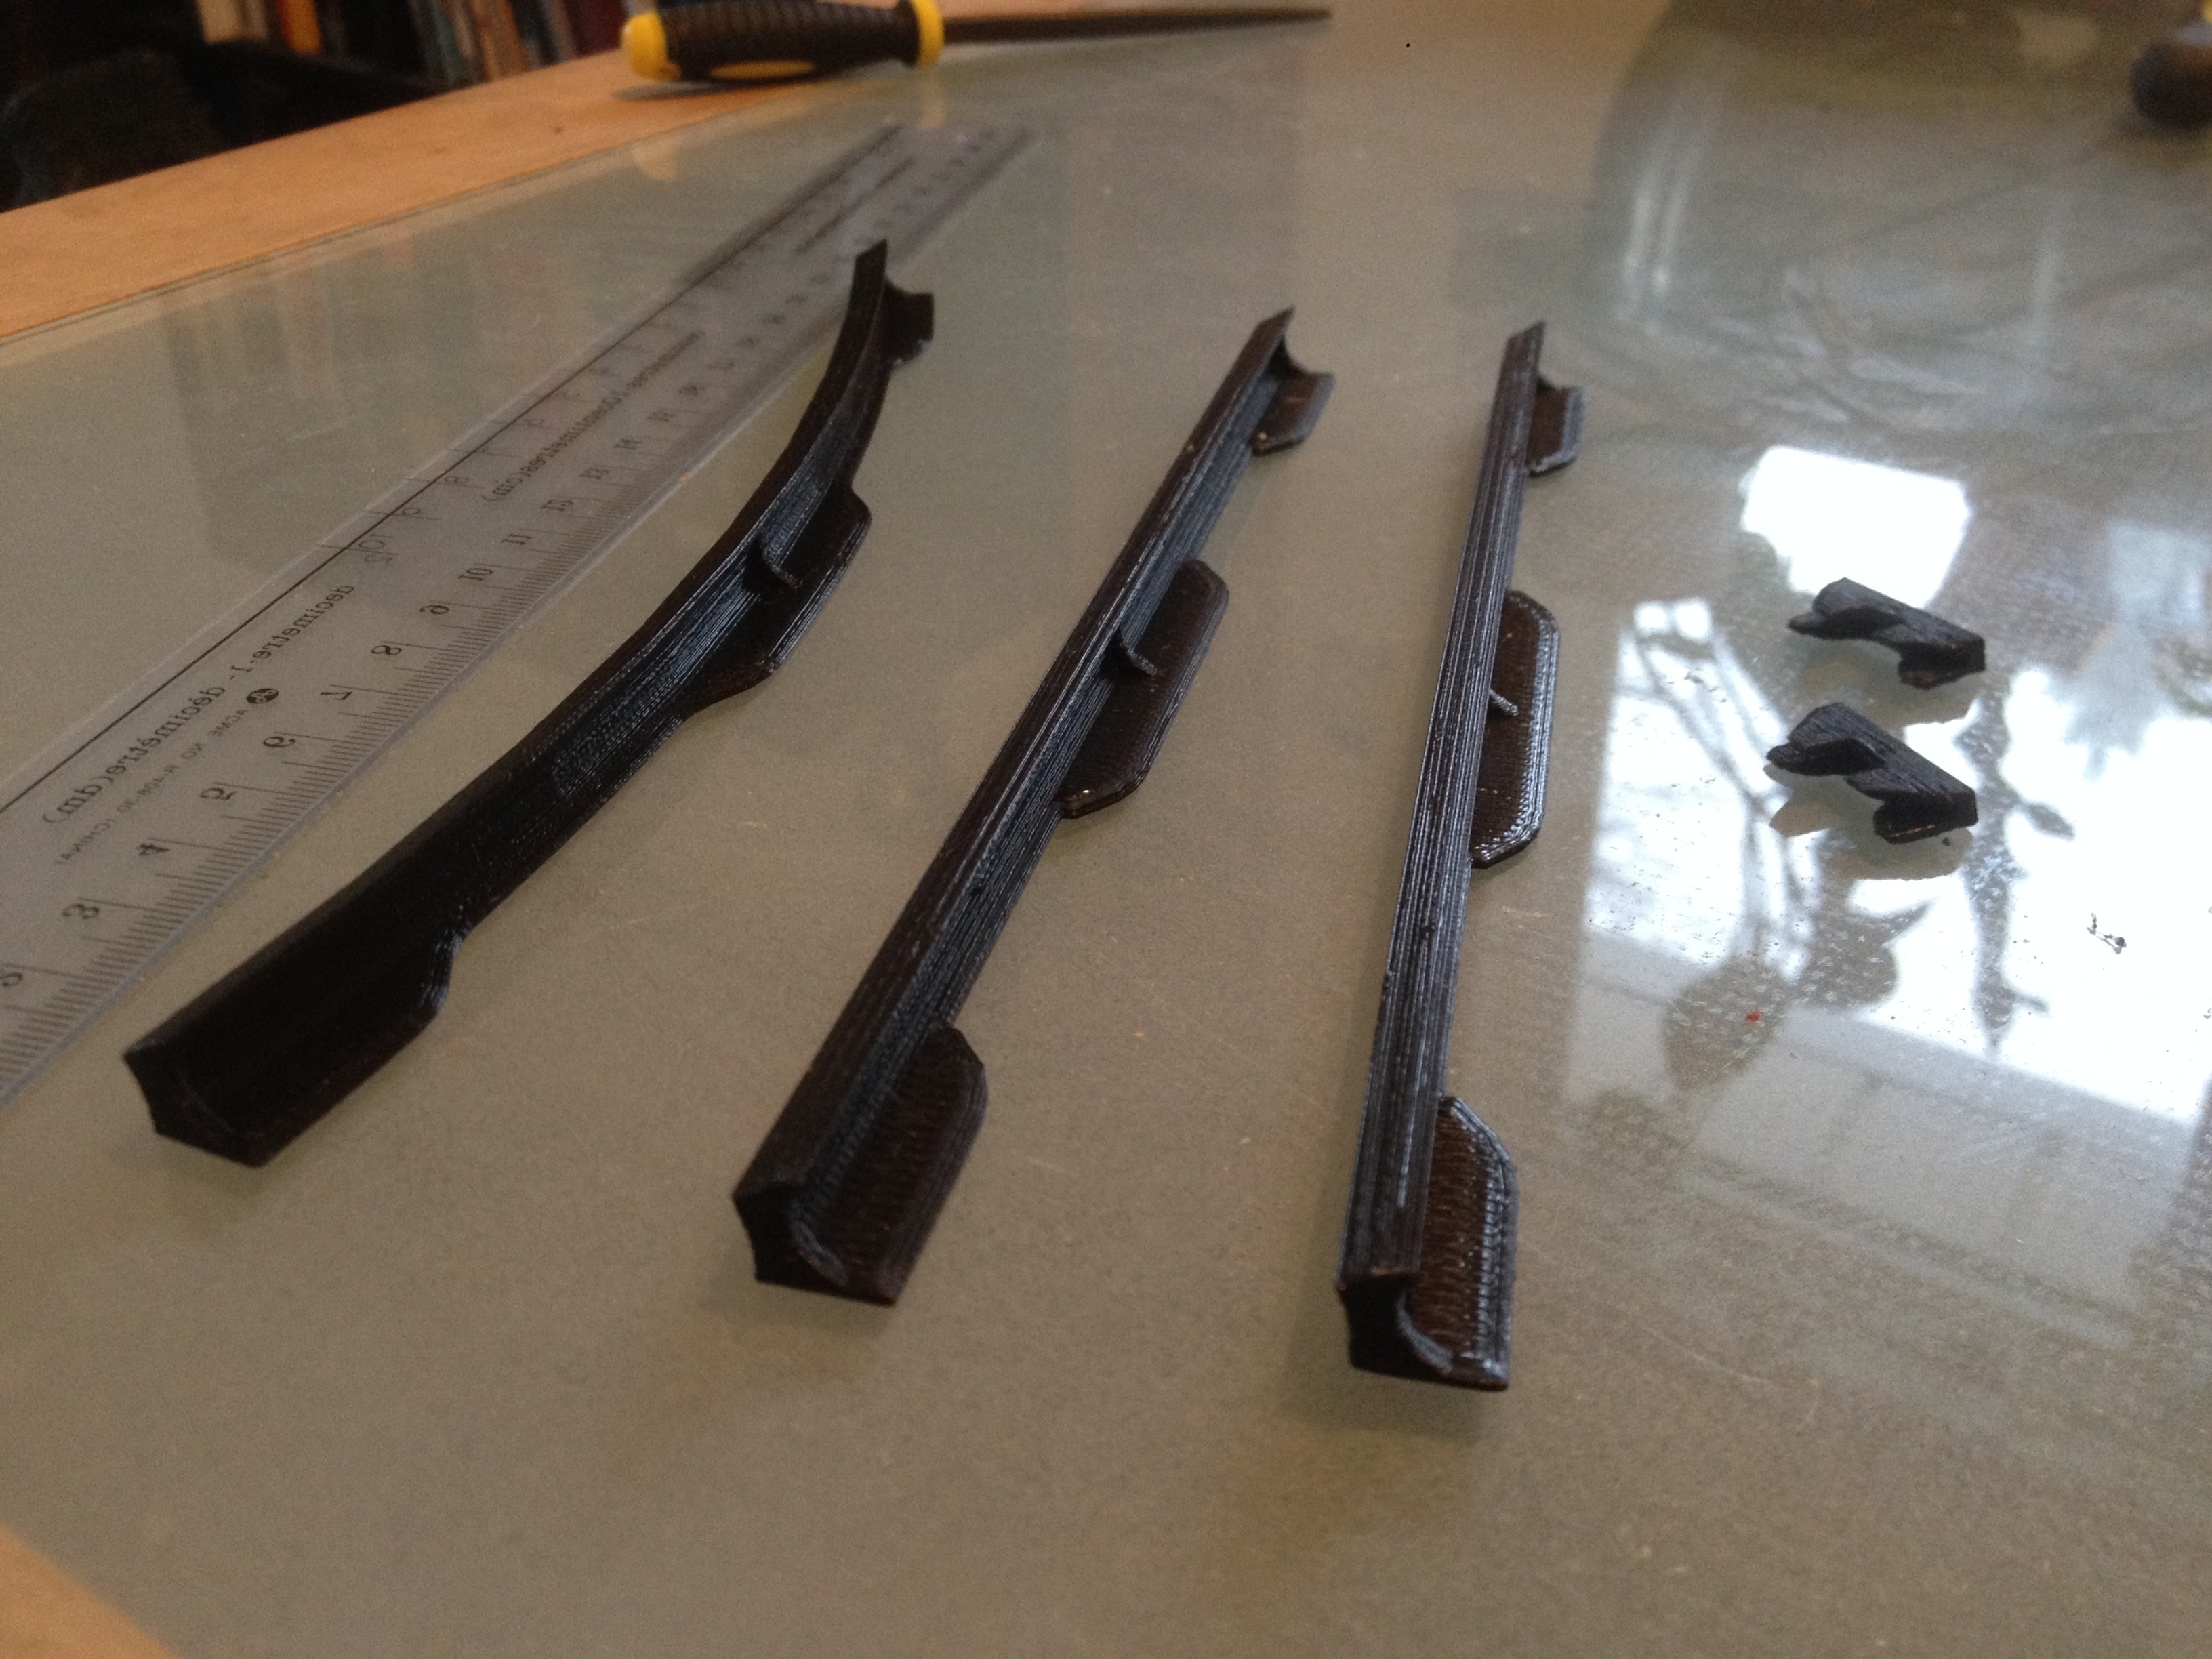 3D Printed race track Rail system by Tomodachi | Pinshape